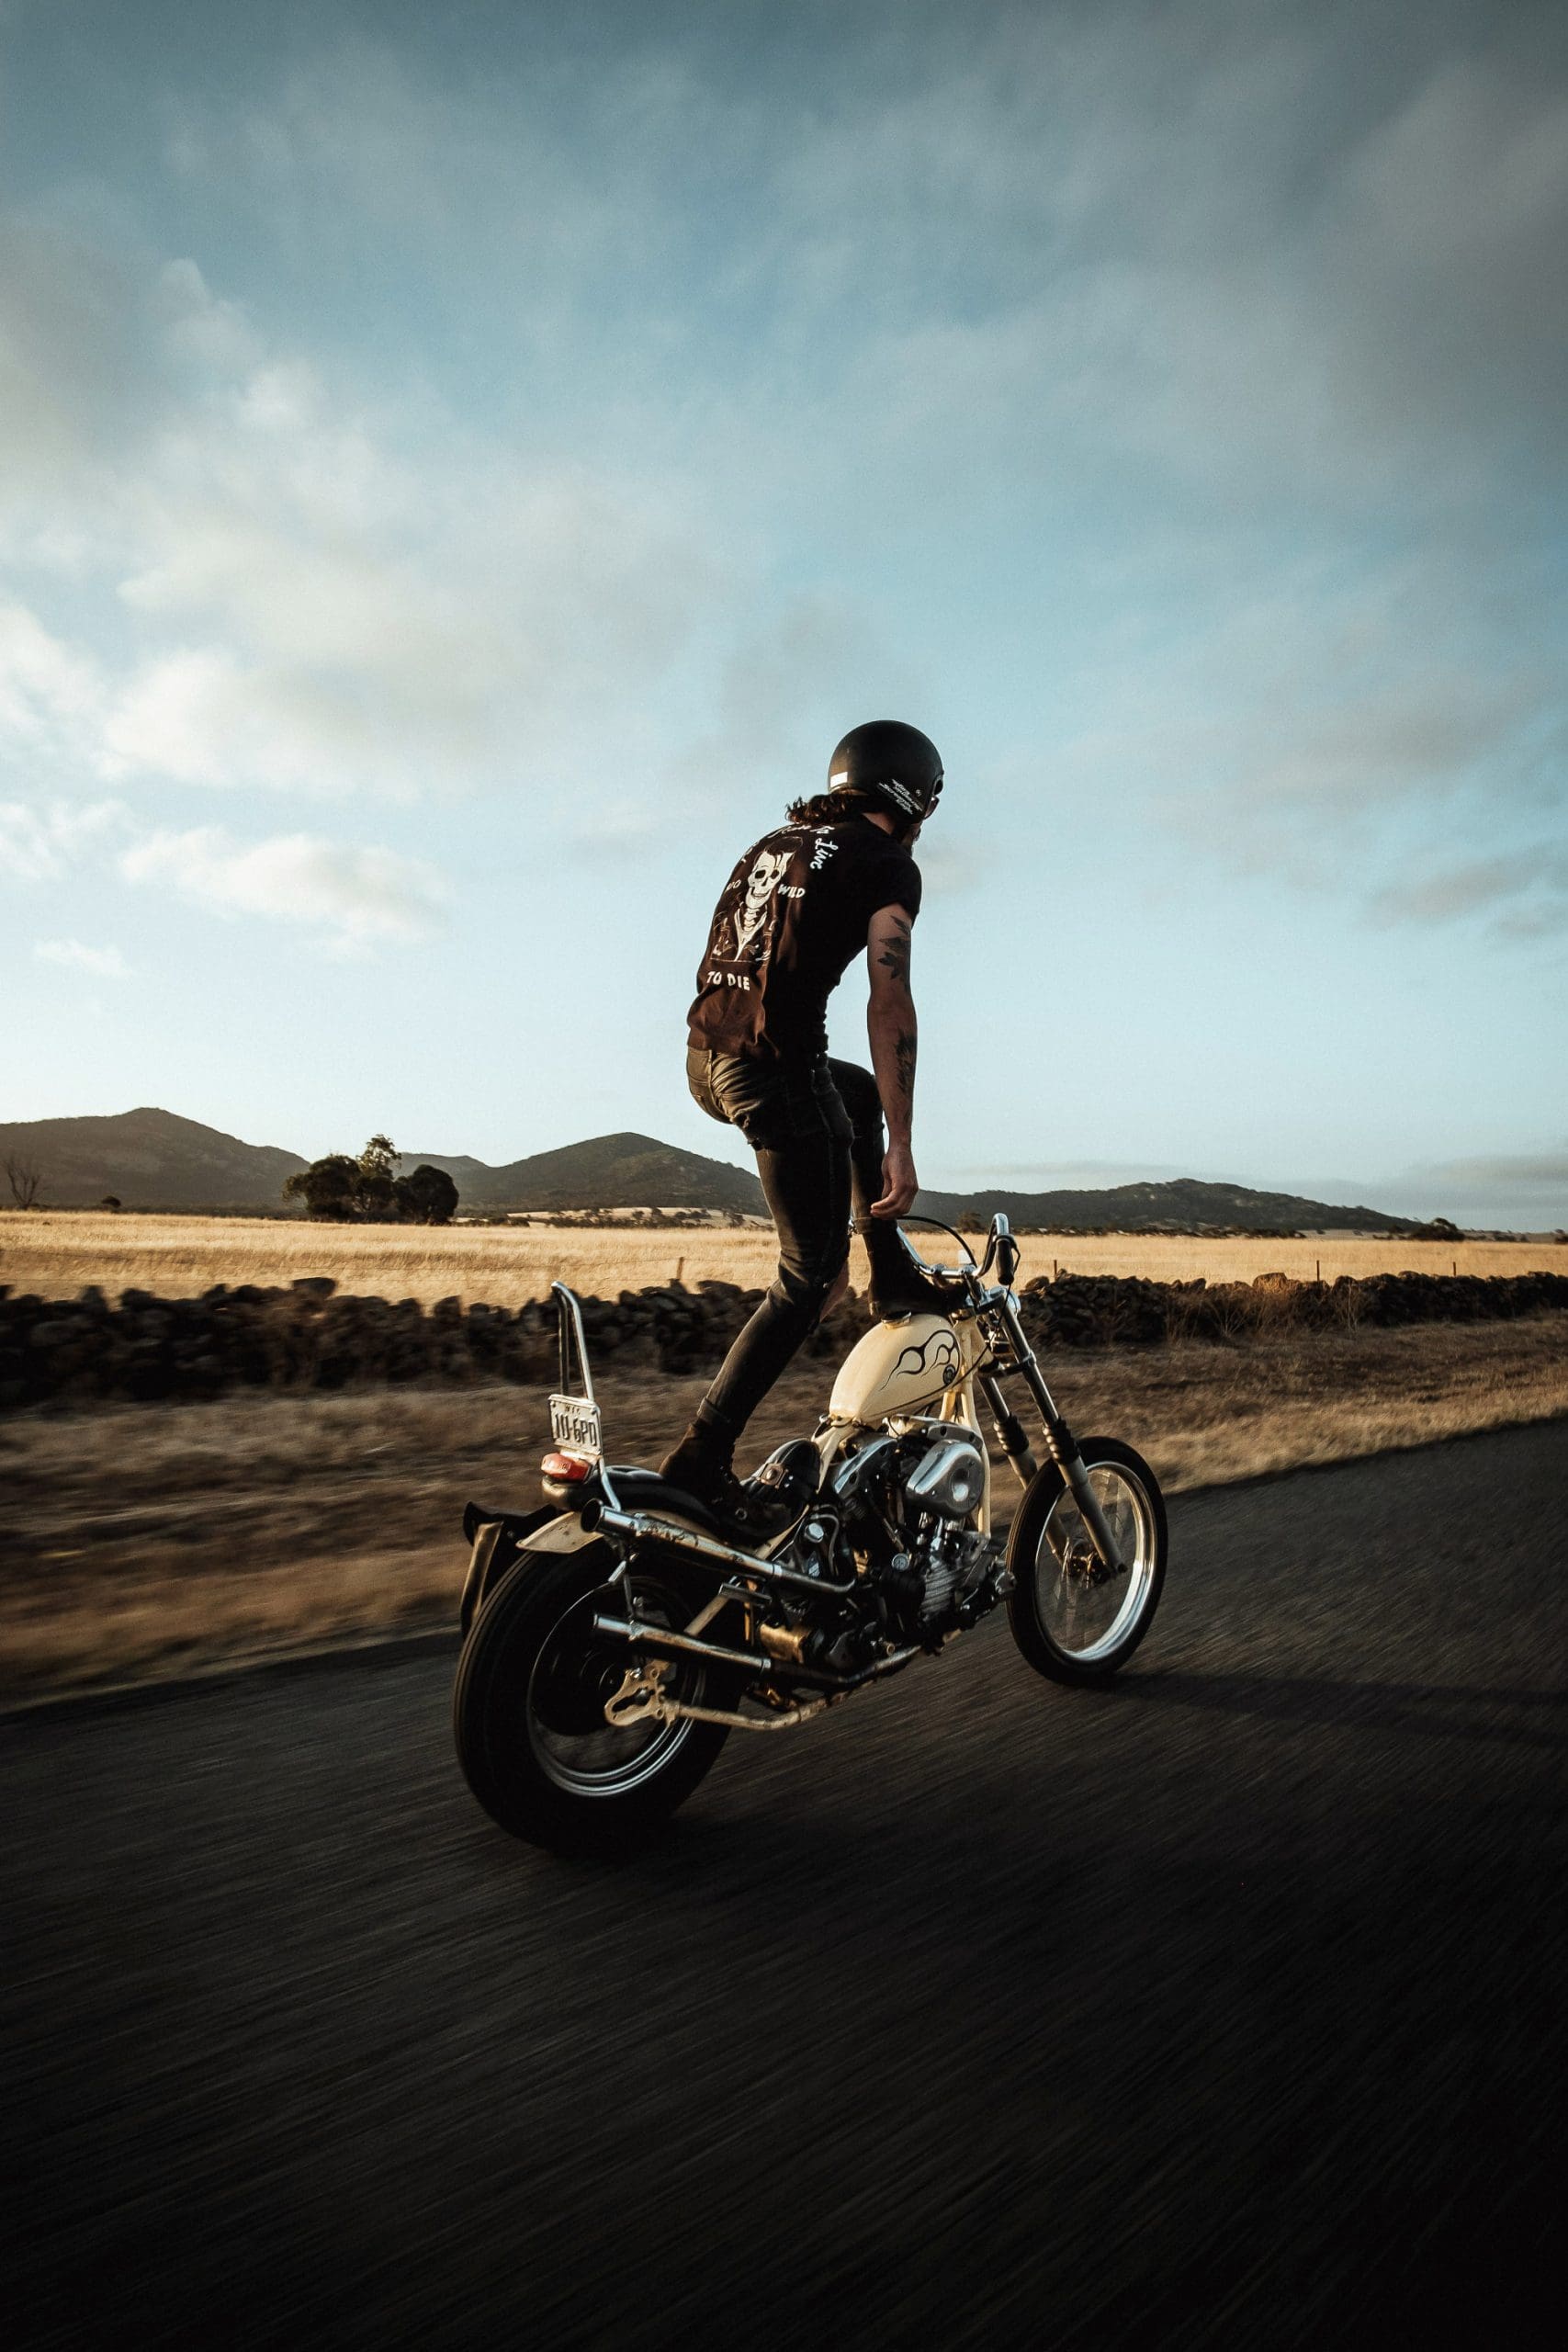 A Harley chopper rider in rural Australia stands upright on his bike as it travels down the road